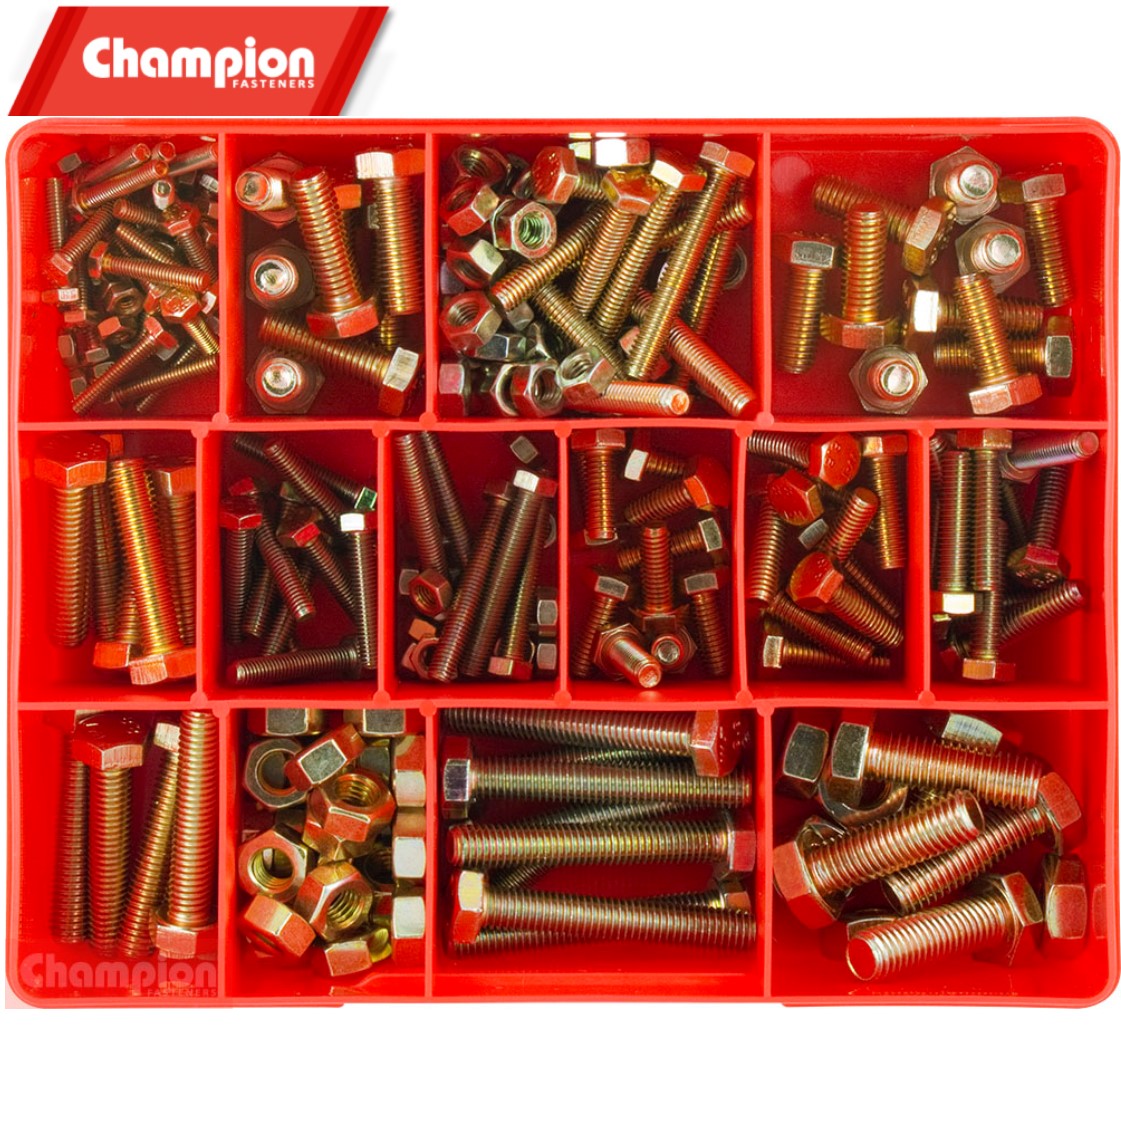 Ca200 Champion Fasteners Hex Flange Head Metric Bolt And Nut Assortment Kit 202 Piece Collins 